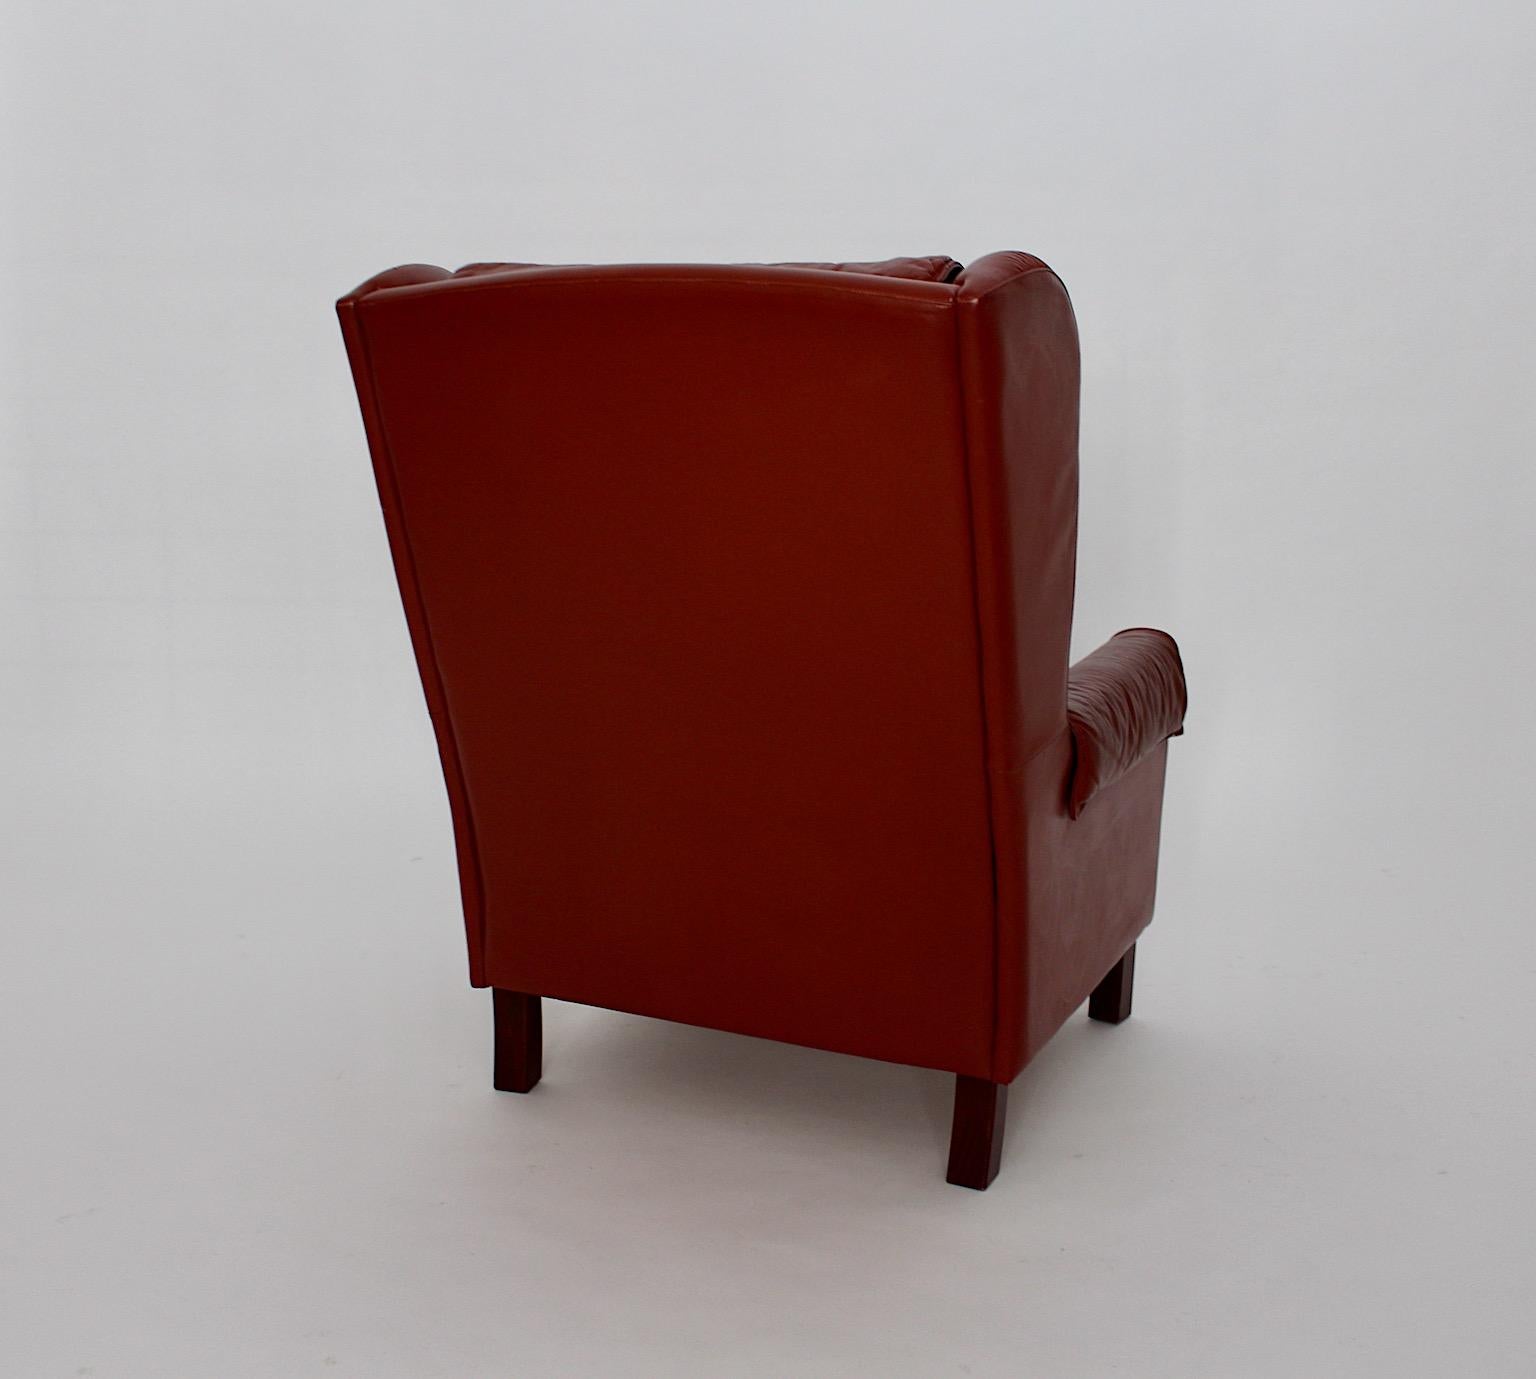 Leather Reddish Brown Vintage Wingback Chair Lounge Chair 1970s Austria For Sale 7